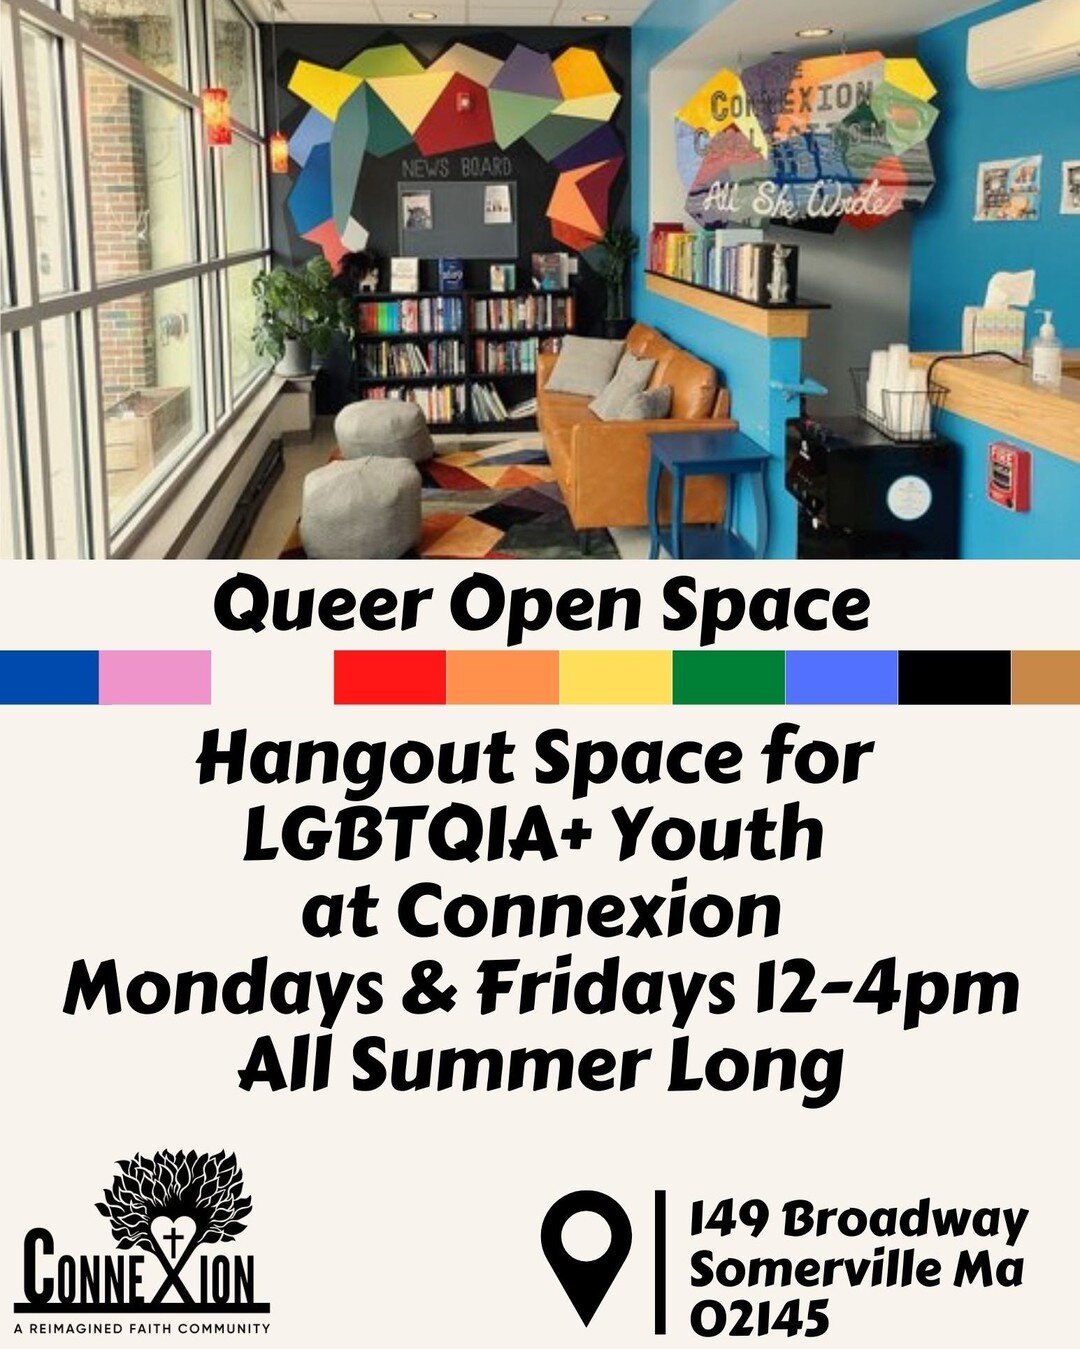 Happy Pride! We are so excited to announce that this summer Connexion has dedicated our space specifically to Queer Youth as open space to come and be. Every Monday and Friday 12-4pm you are invited to come to a safe and sacred space to be yourself a